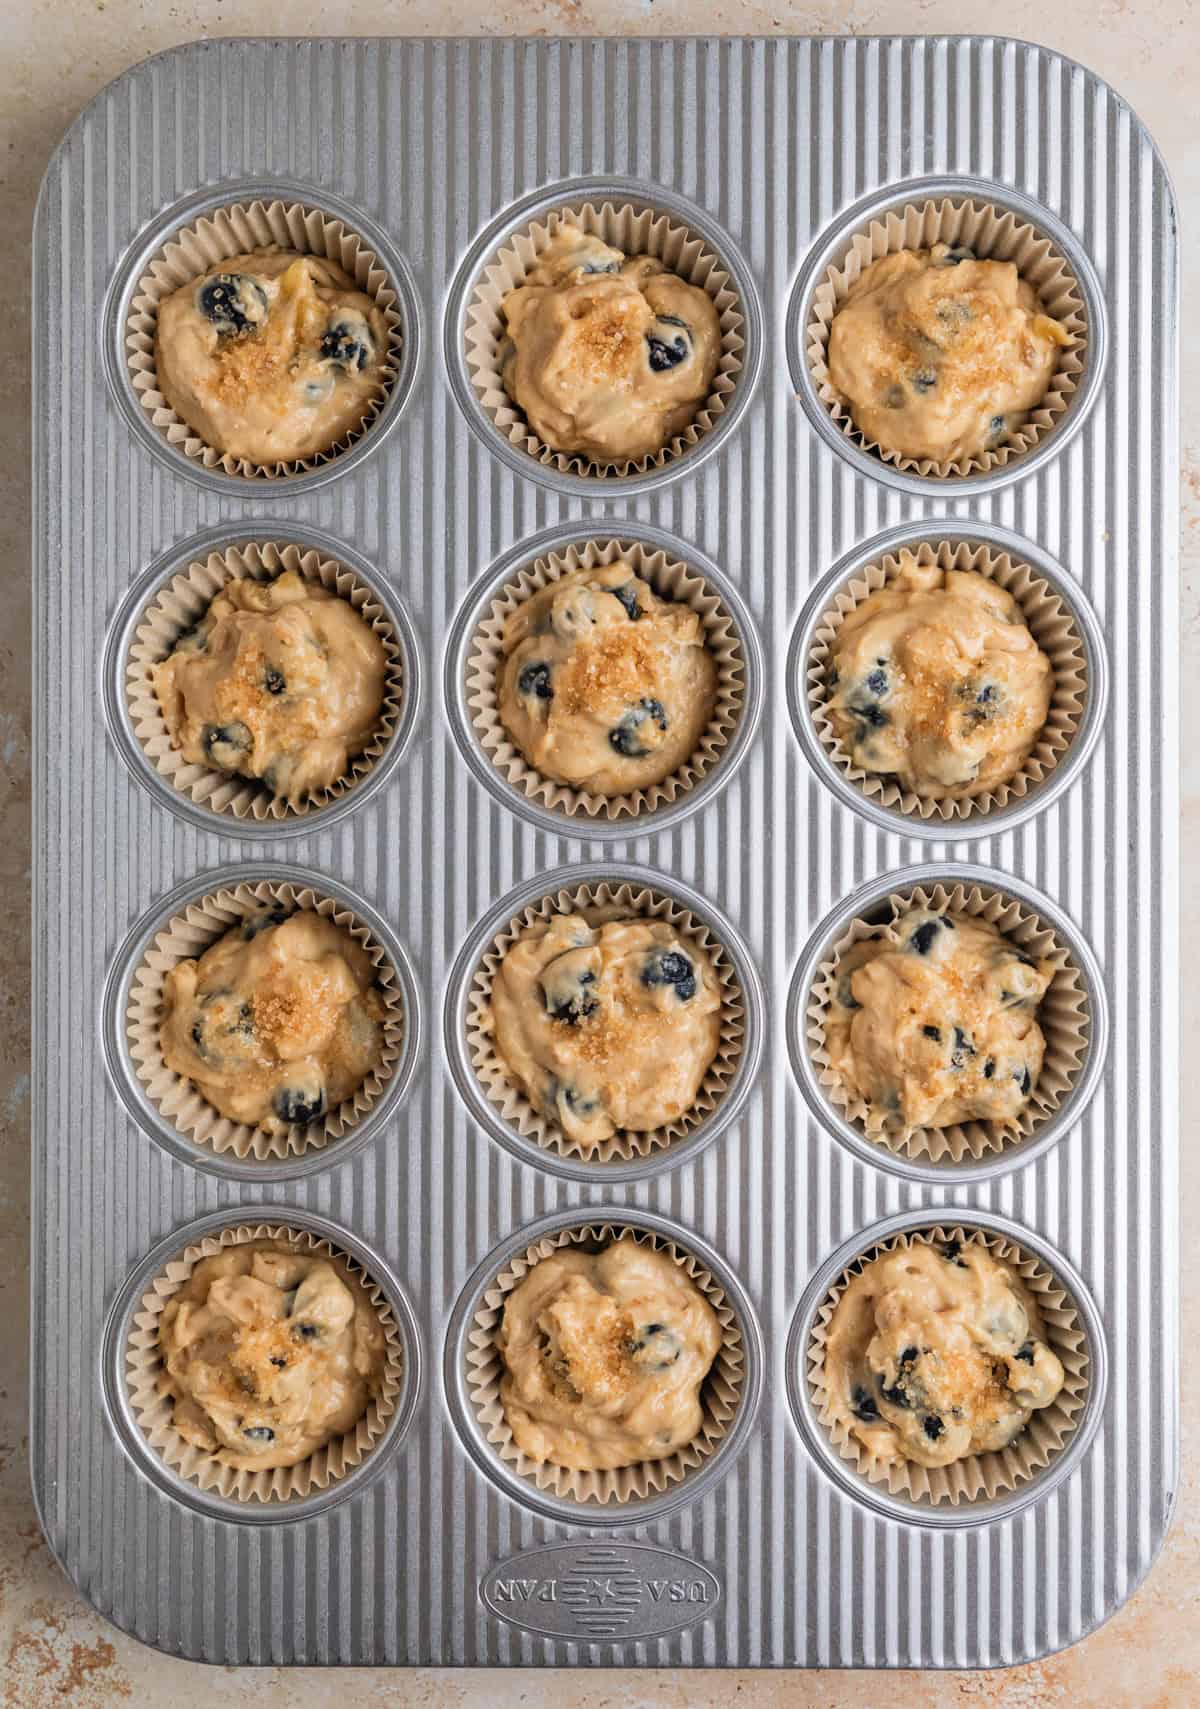 Blueberry banana muffin batter scooped into muffin tin before baking.